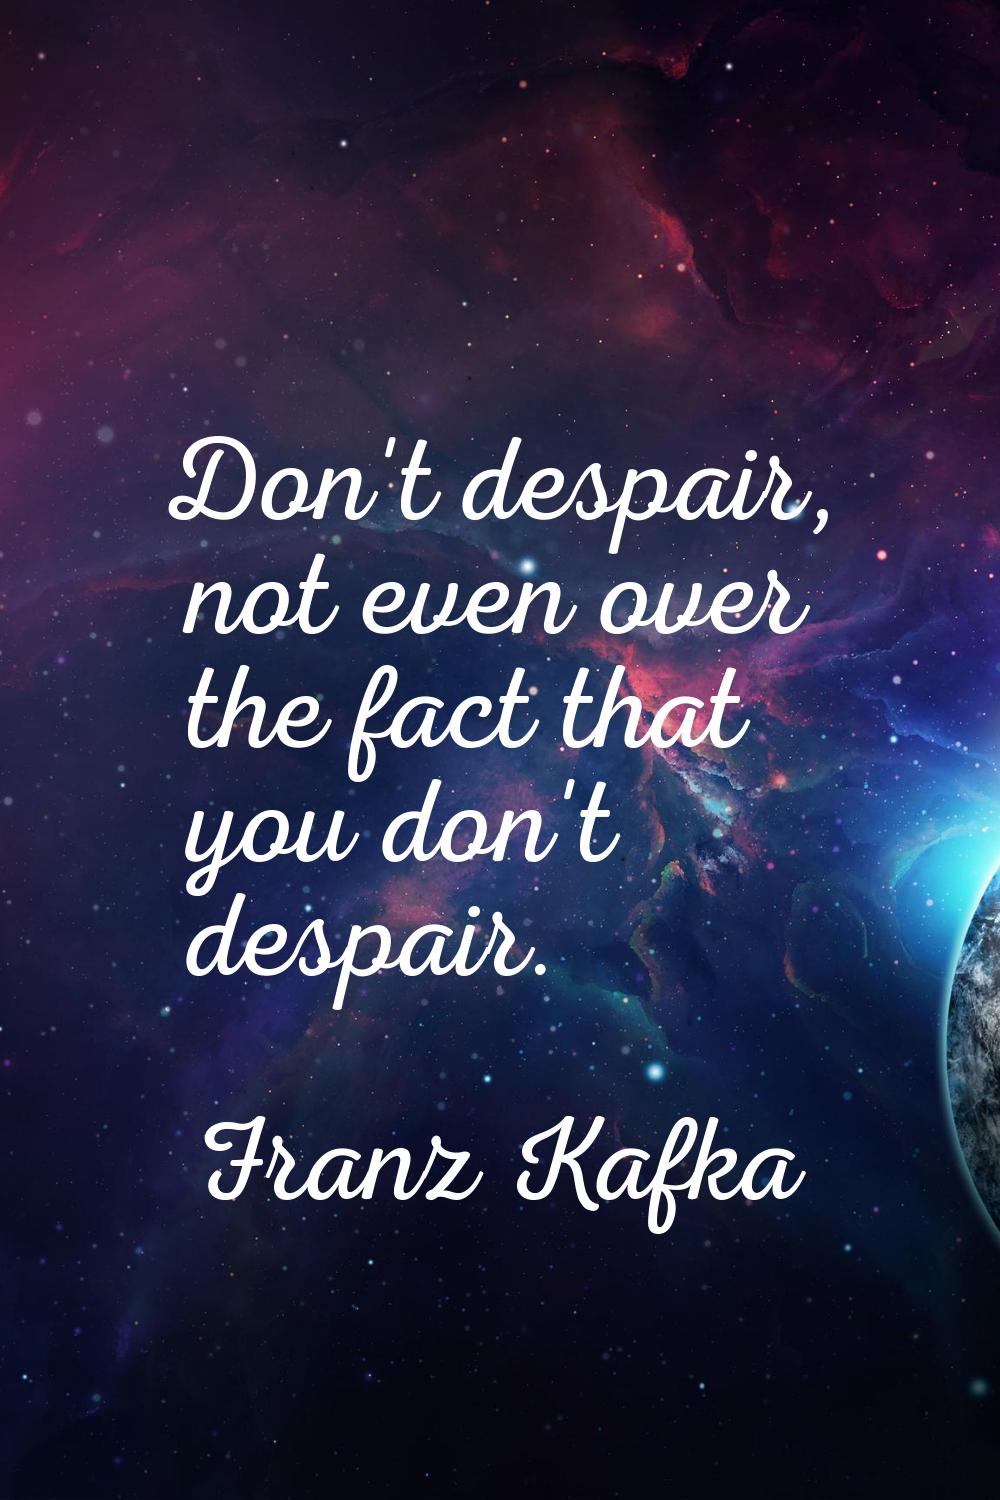 Don't despair, not even over the fact that you don't despair.